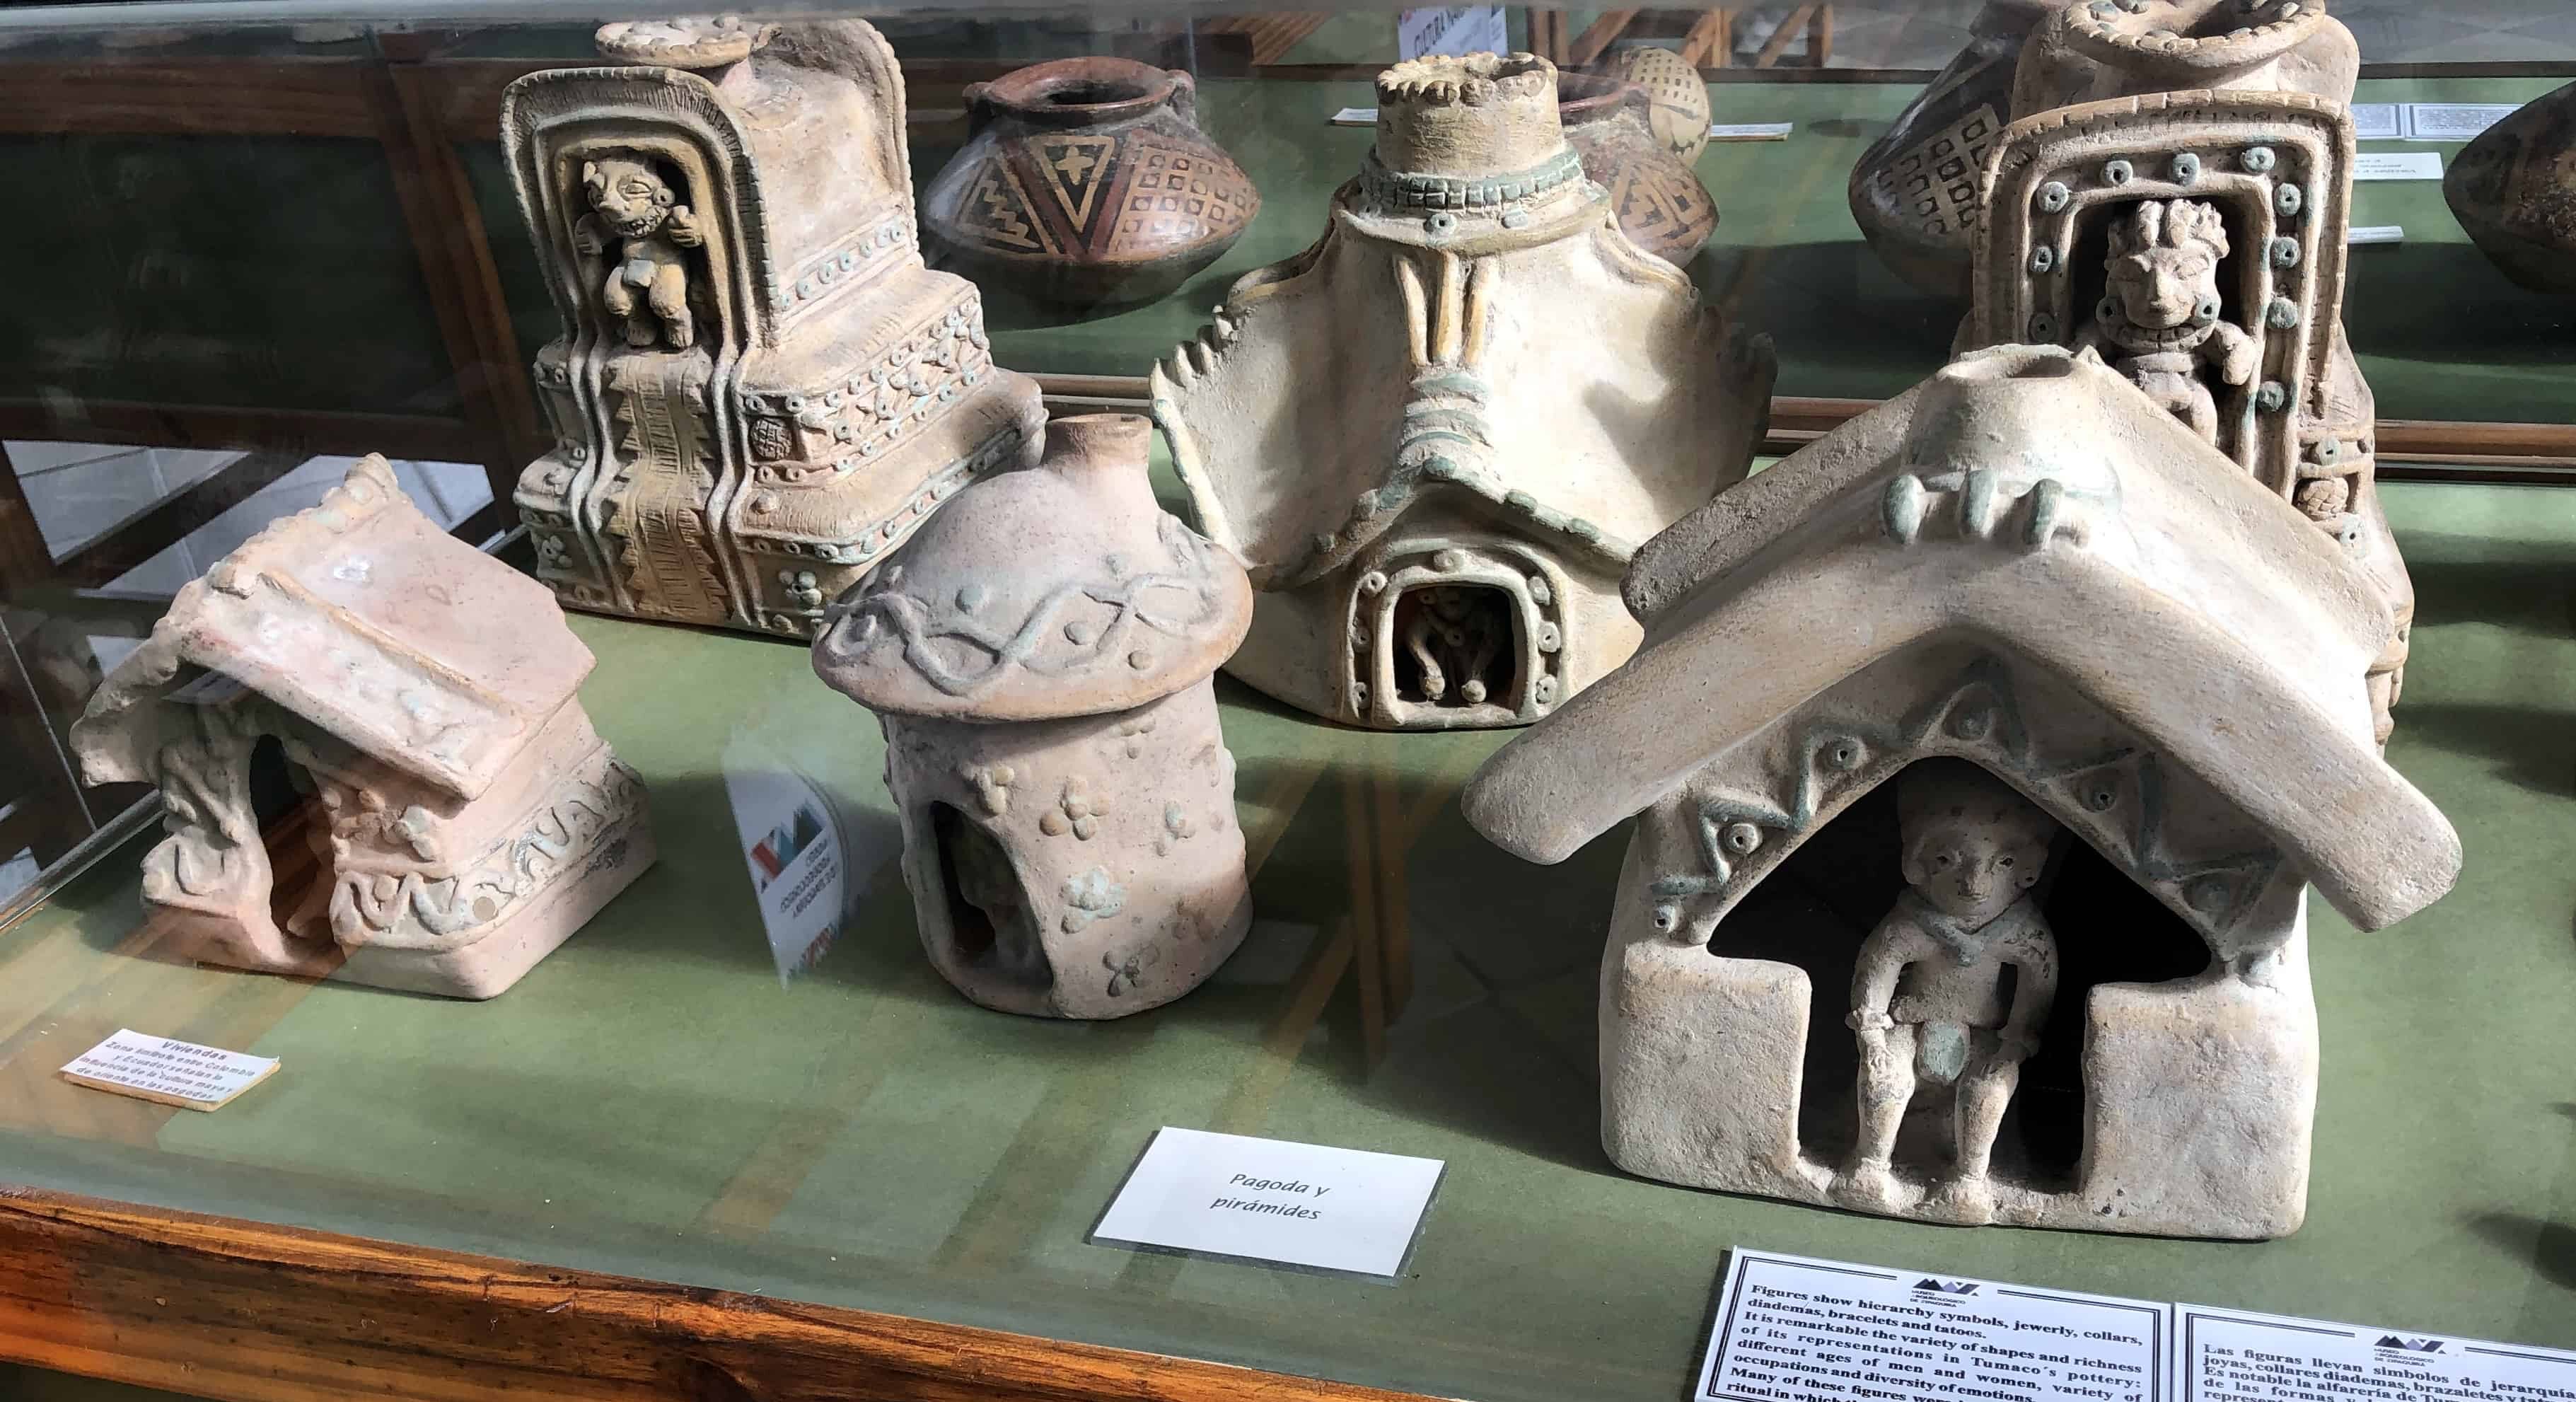 Artifacts from the Tumaco culture at the Archaeological Museum